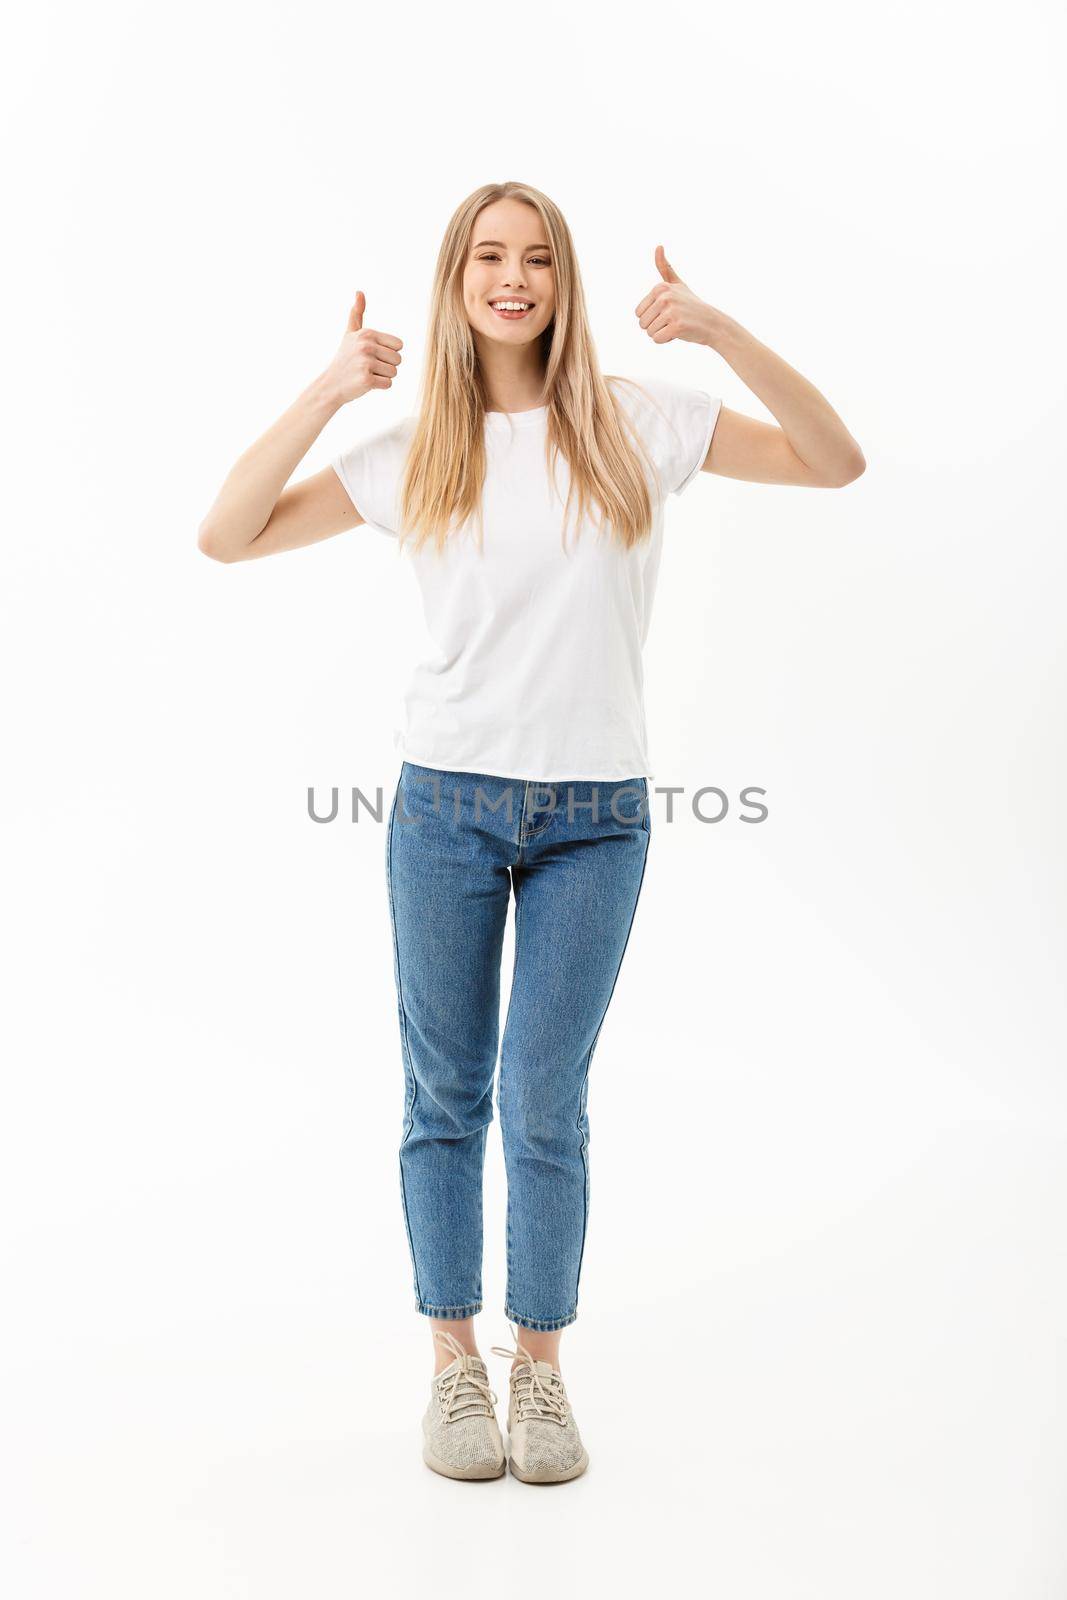 Lifestyle Concept: Happy smiling young woman in jeans looking at the camera giving a double thumbs up of success and approval isolated on white.